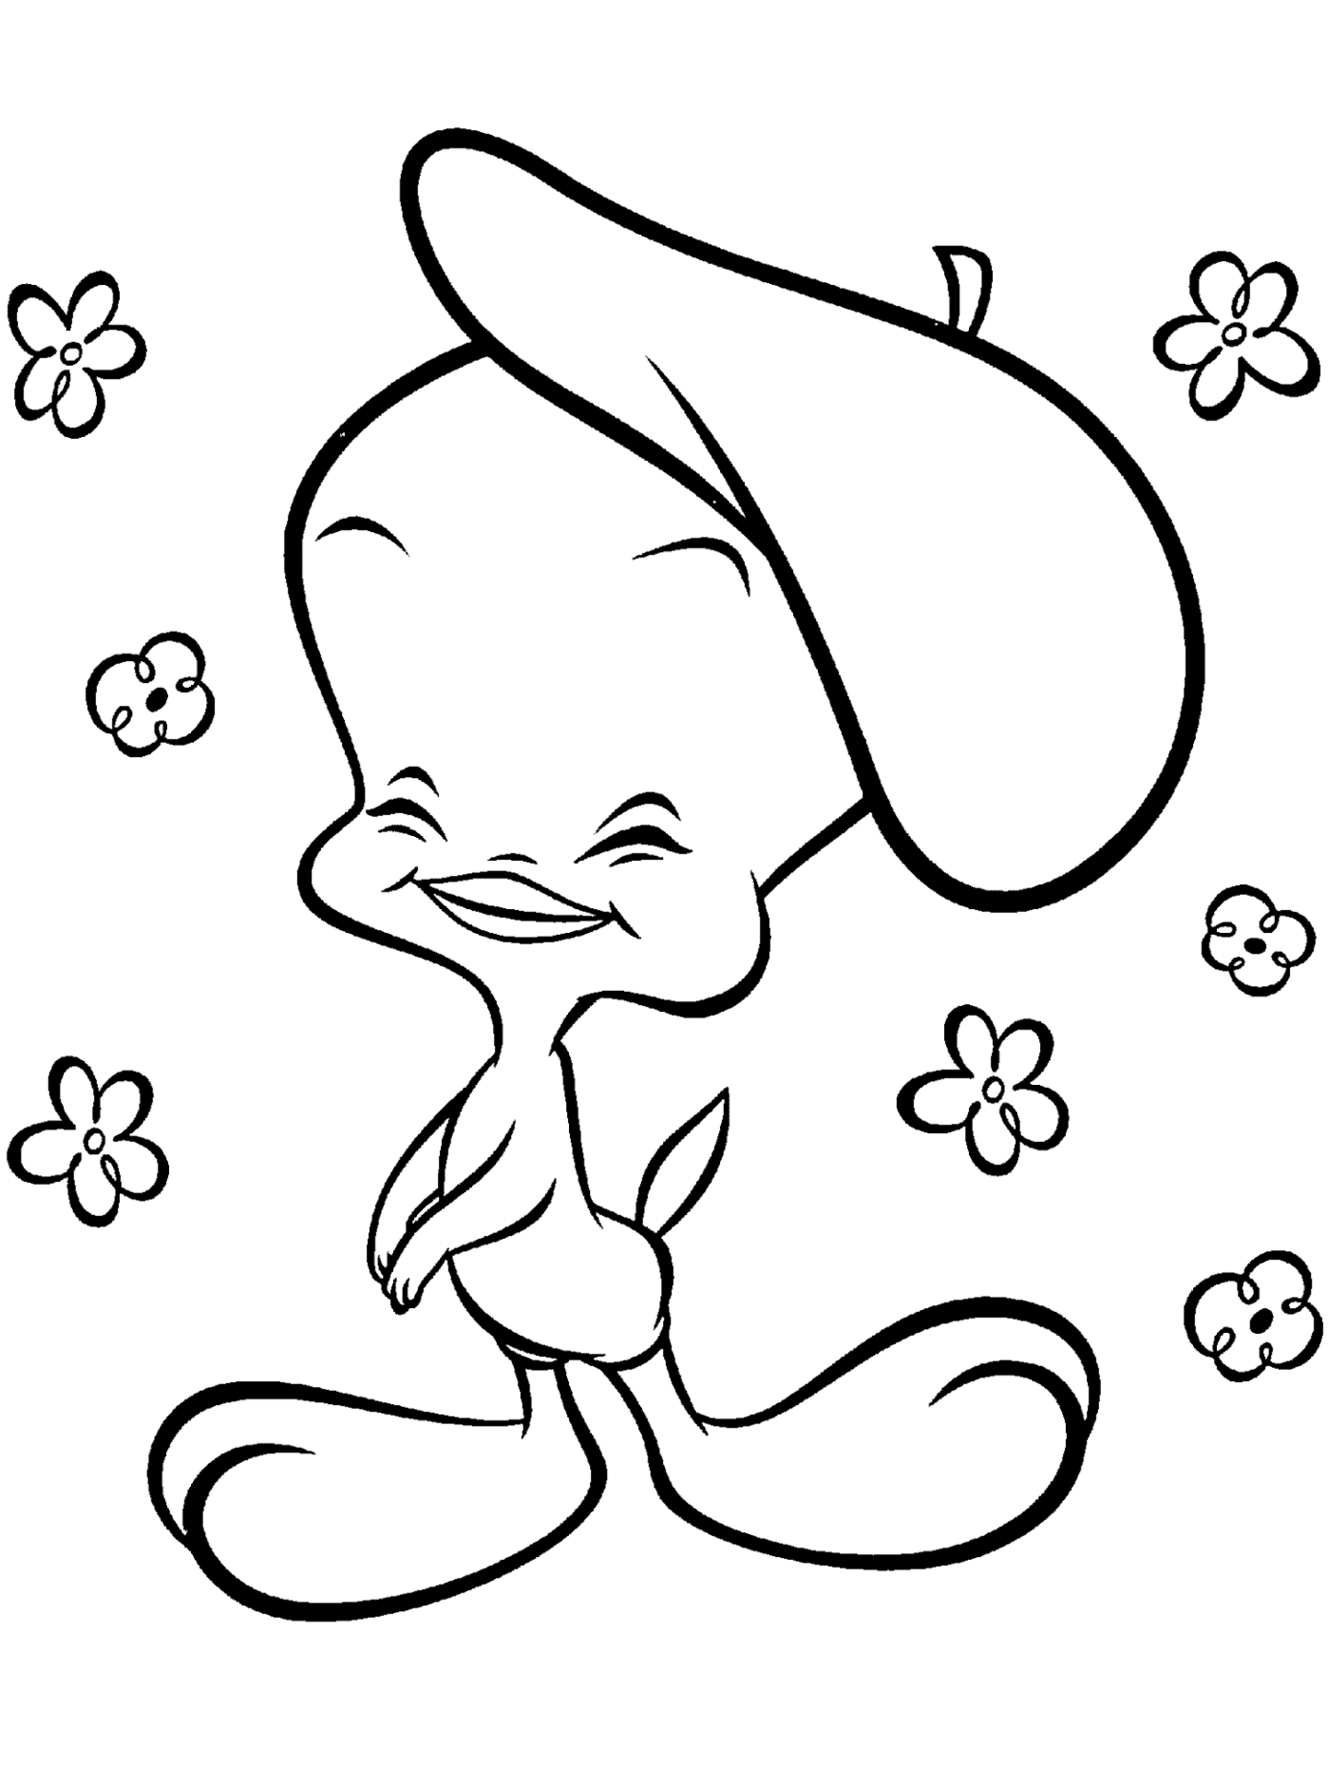 Tweety Bird Vector Black And White Clipart - Free to use Clip Art ...